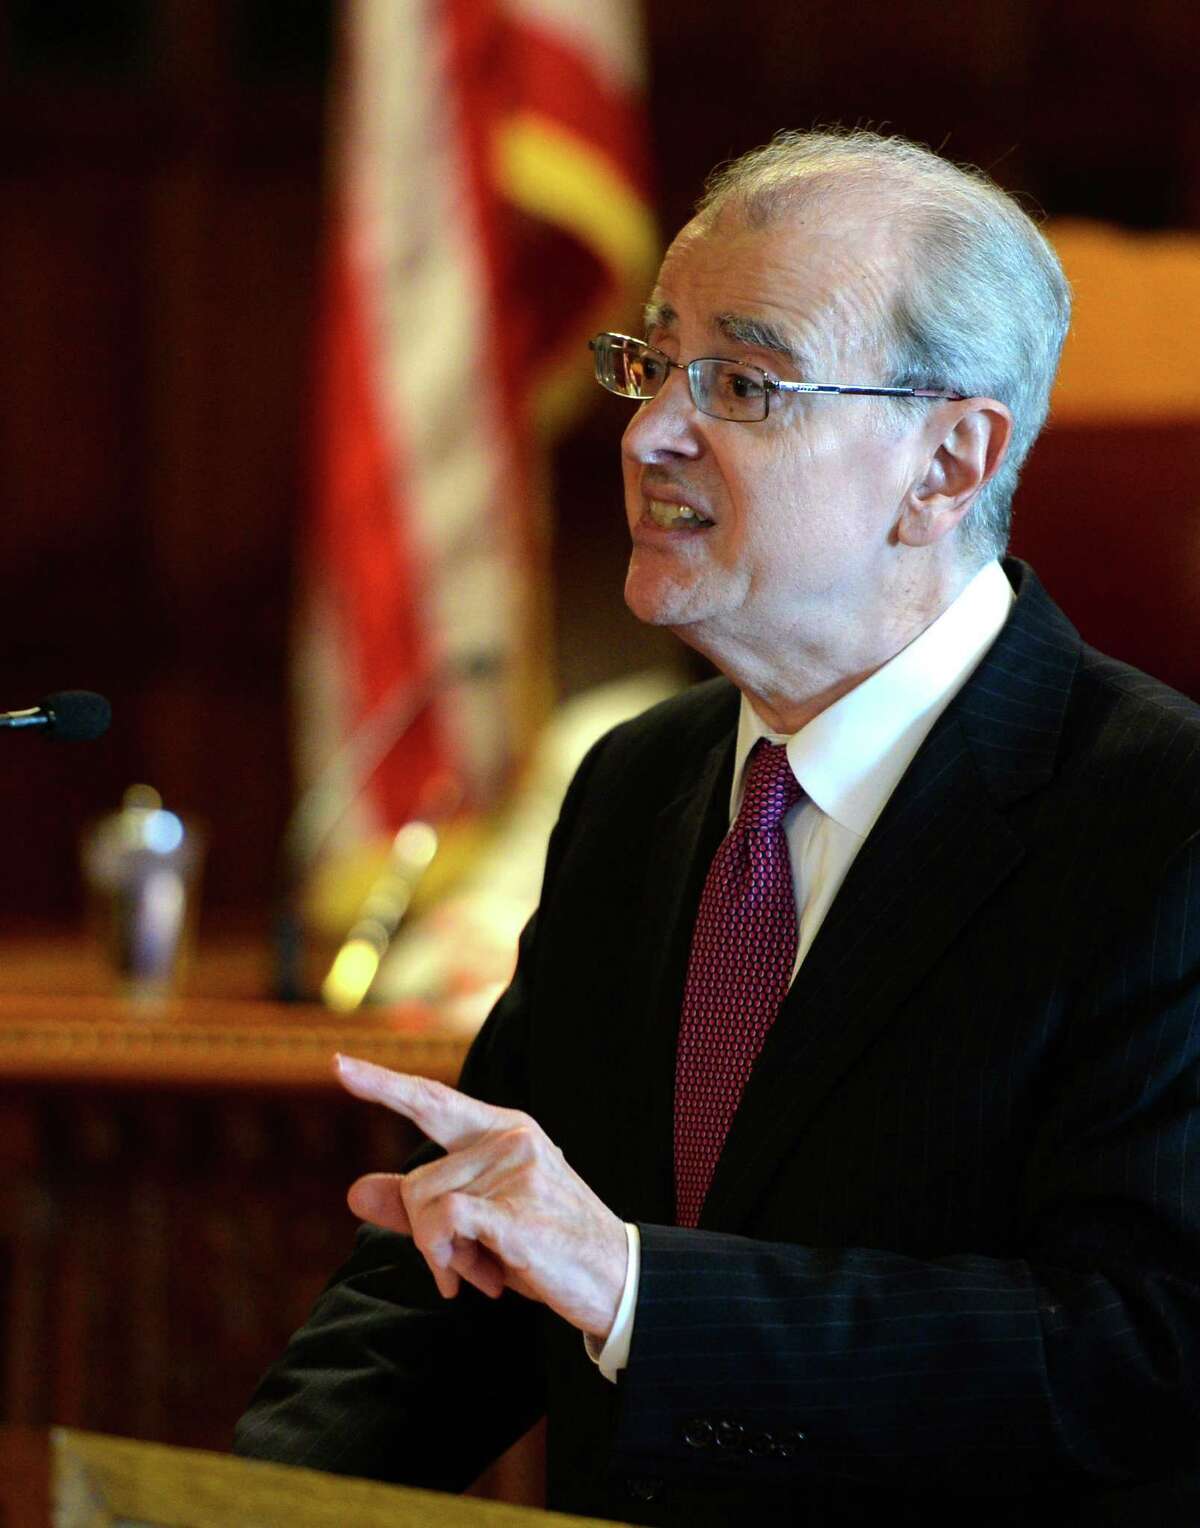 New York State Court of Appeals Chief Judge Jonathan Lippman gives his annual State of the Judiciary address Tuesday afternoon, Feb. 11, 2014, at Court of Appeals Hall in Albany, N.Y. (Skip Dickstein / Times Union)